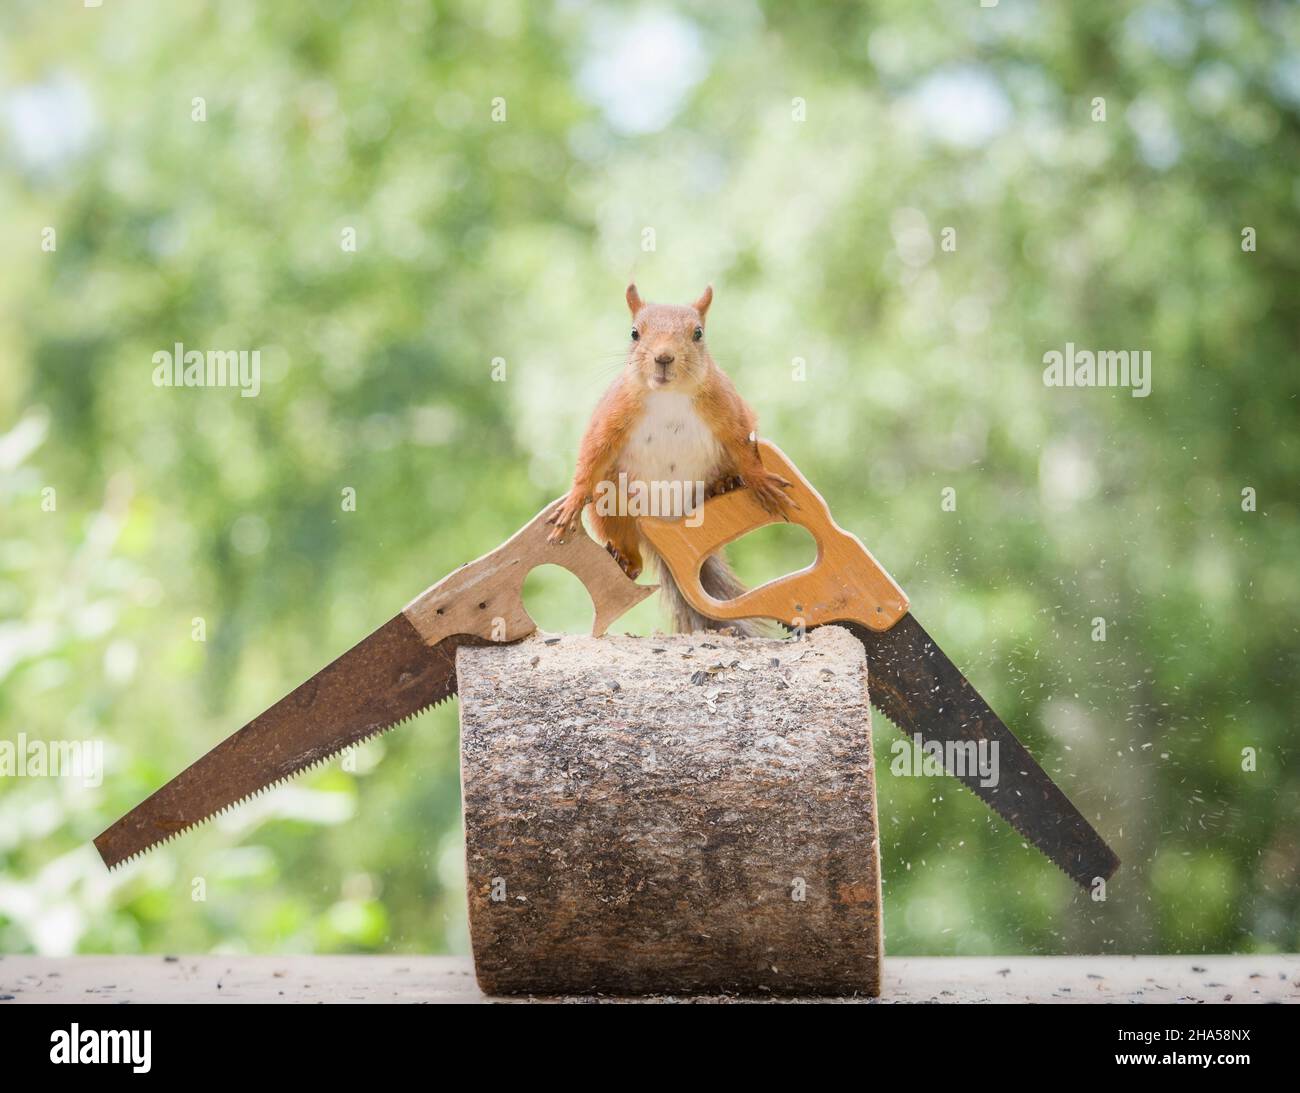 red squirrel is holding hand saws Stock Photo